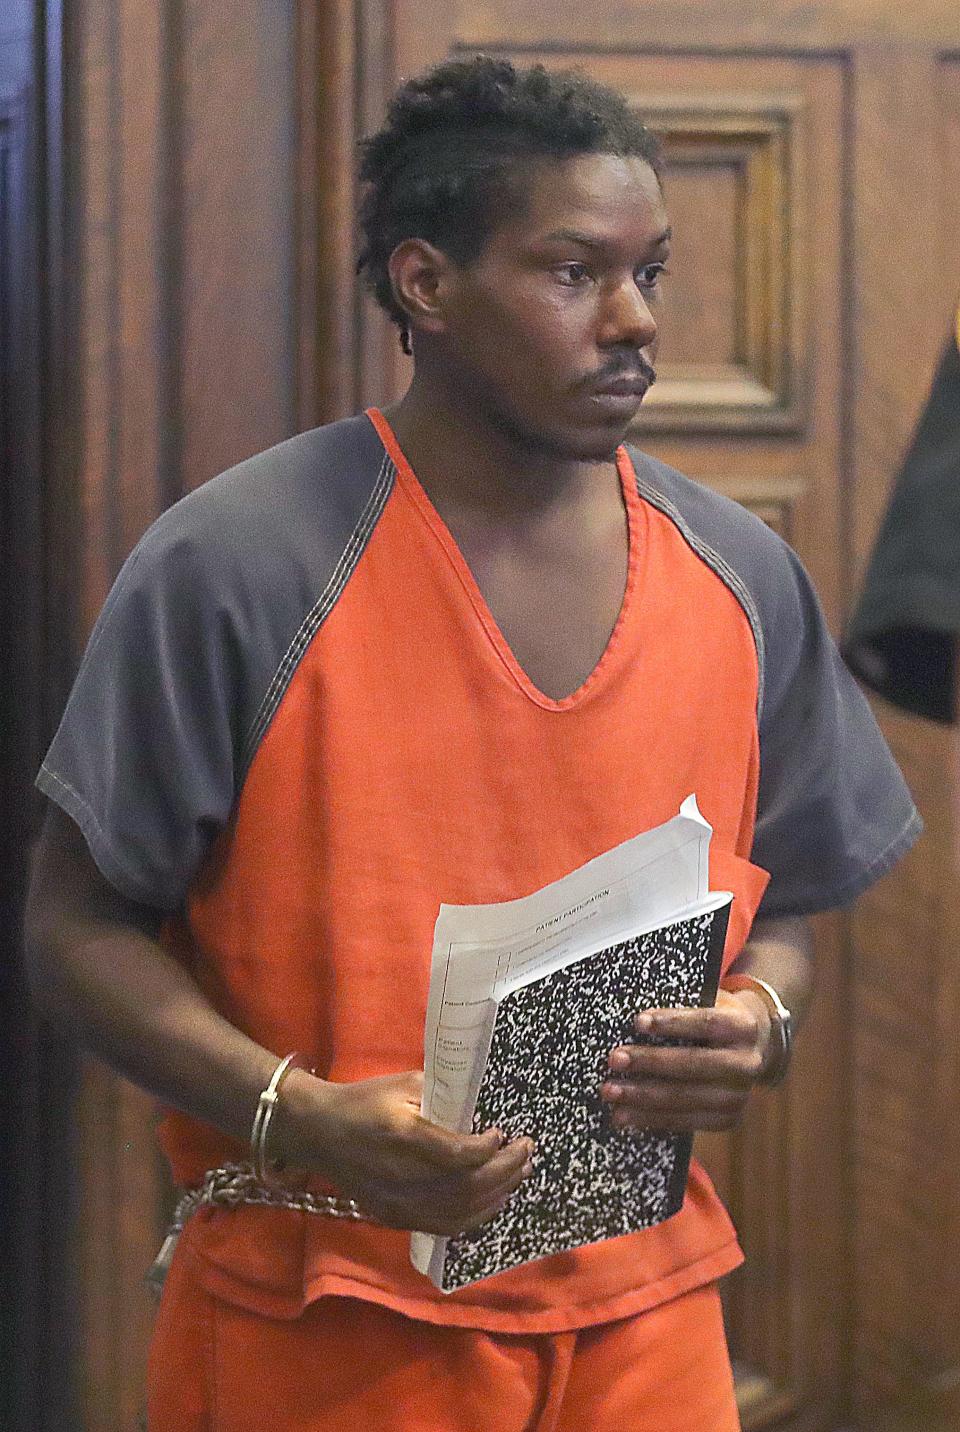 Kahlyl Powe, who is charged in the shooting death of a Lyft driver, enters a Summit County Common Pleas courtroom for a recent competency hearing. A Summit County judge found Powe to be competent to stand trial.